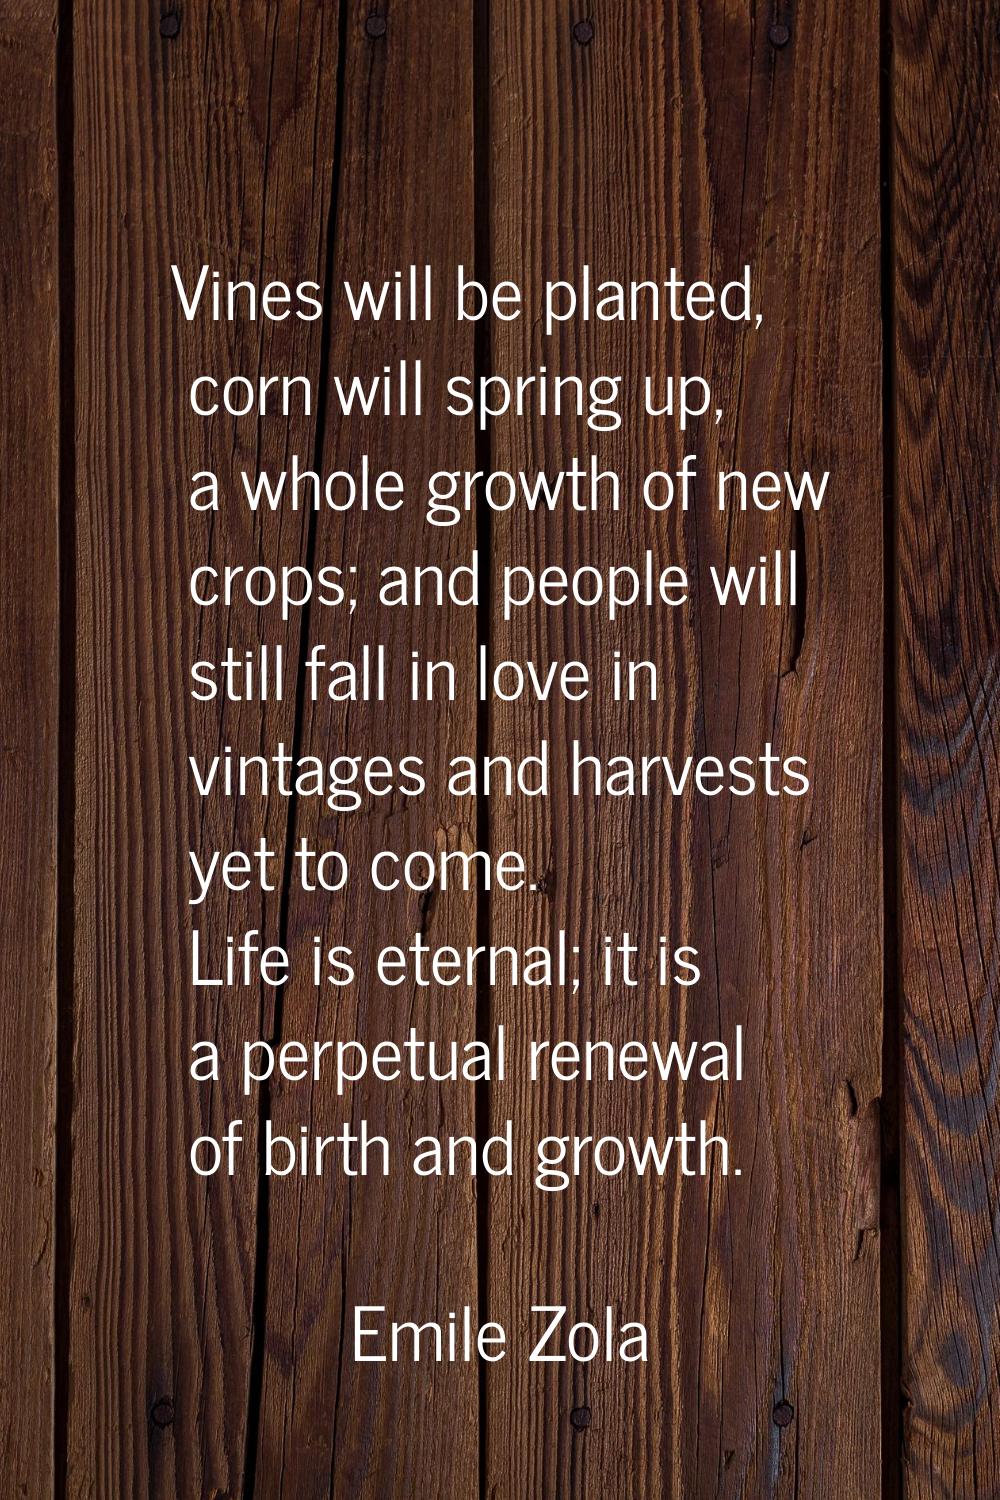 Vines will be planted, corn will spring up, a whole growth of new crops; and people will still fall